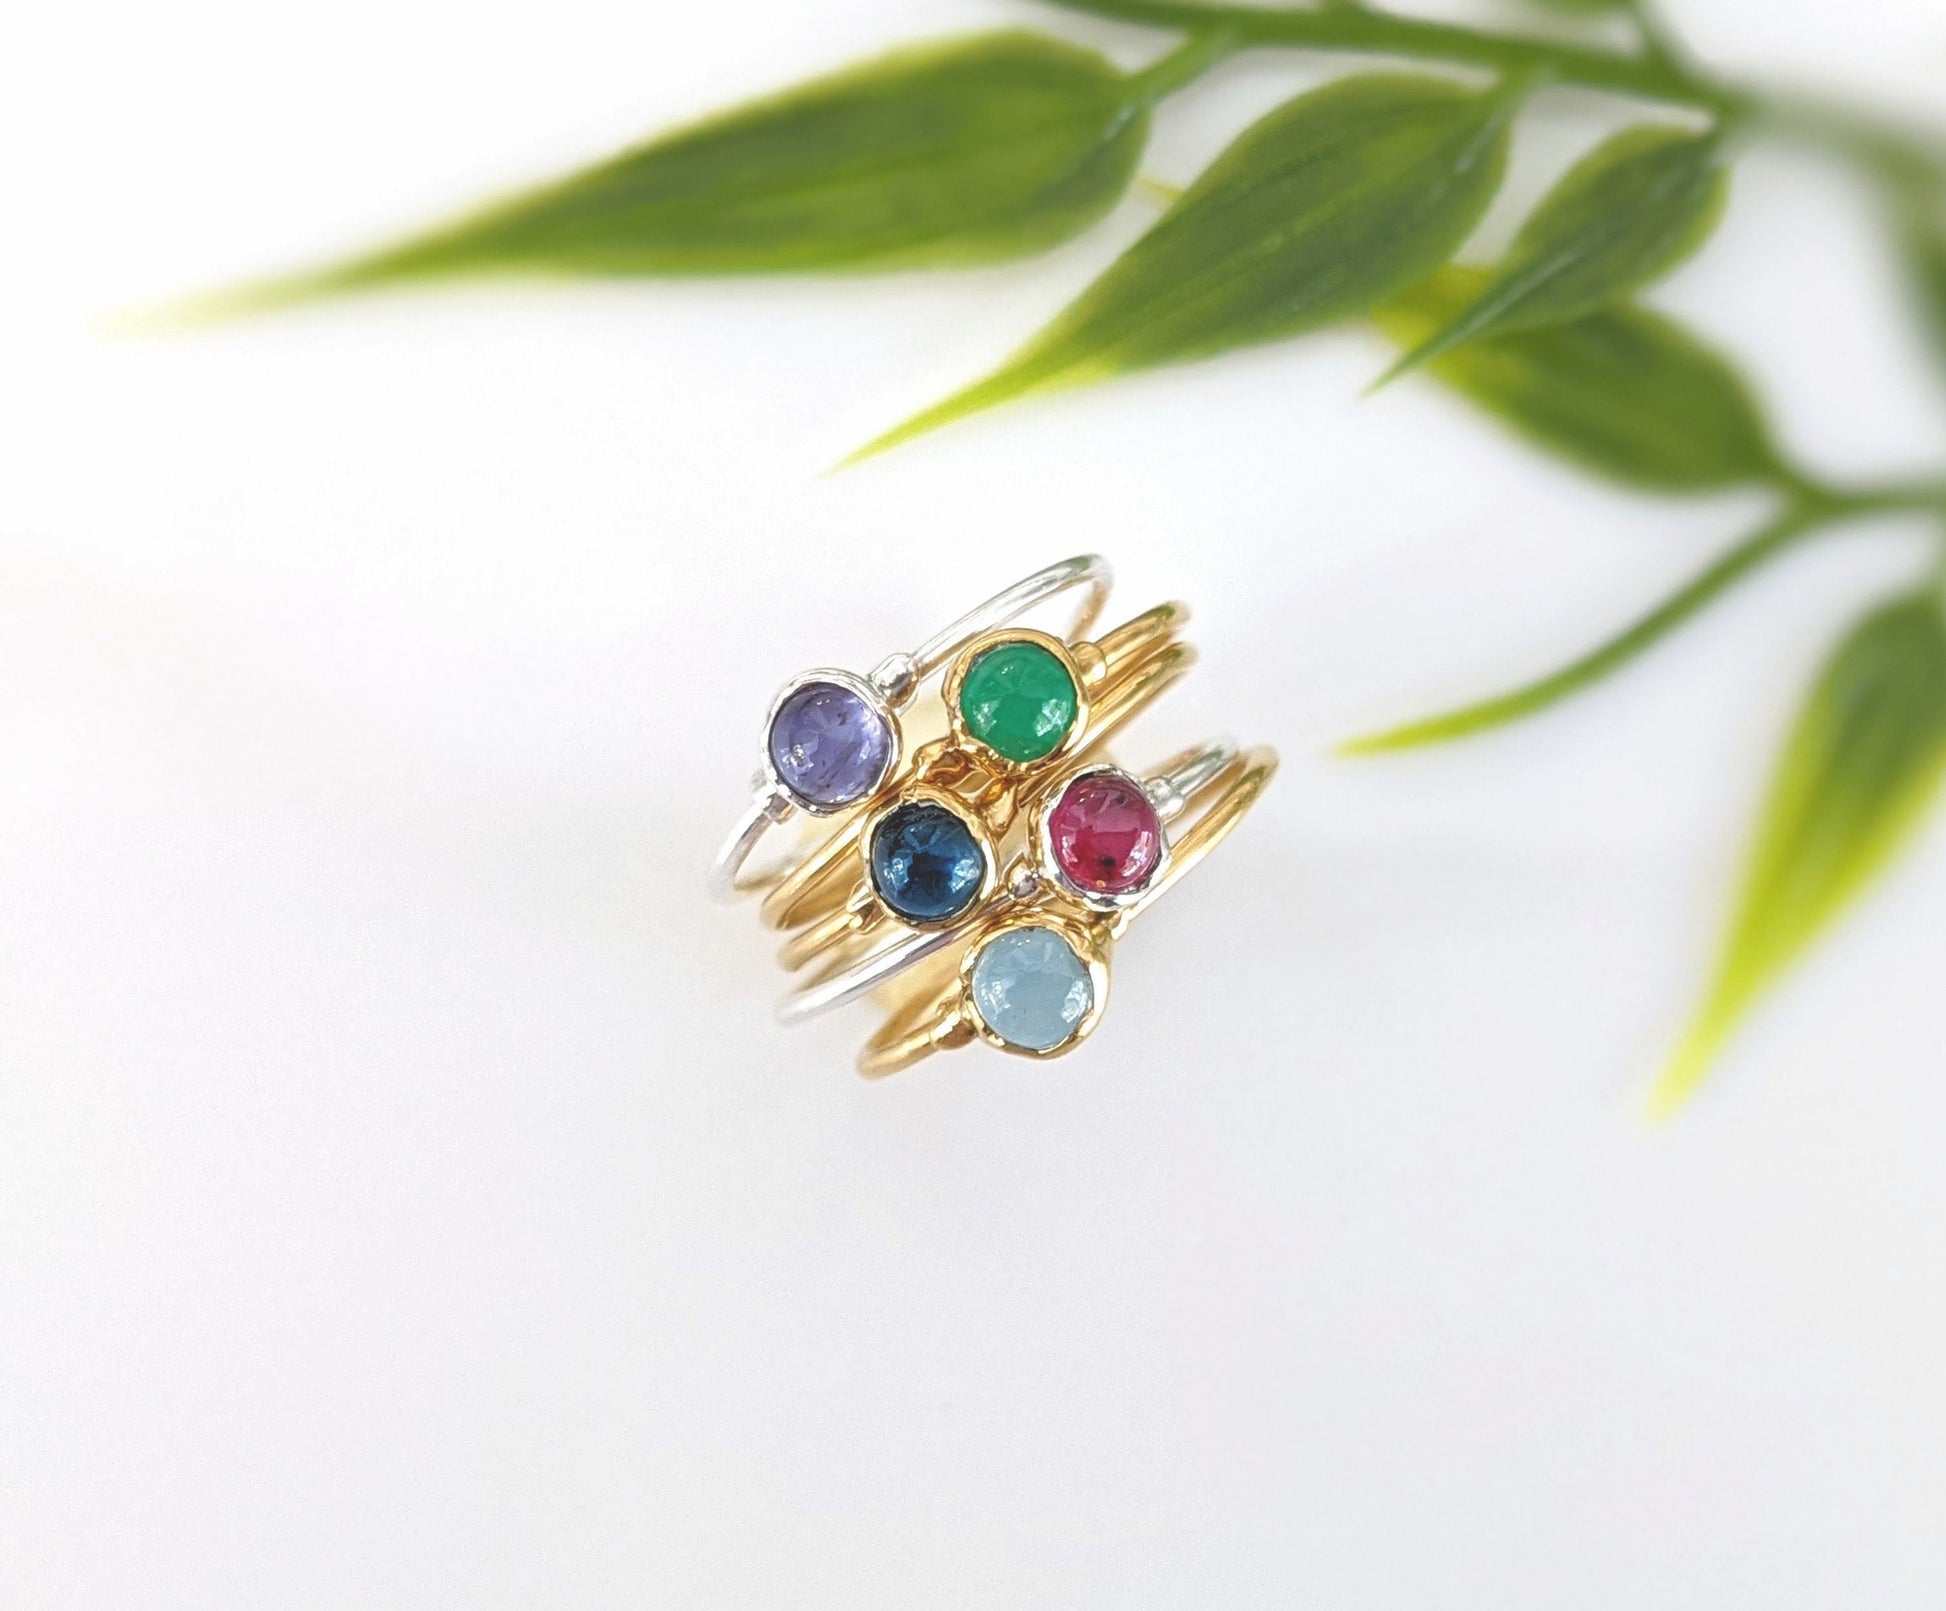 Dainty Gemstone stacking rings in Sterling silver or 18k GOld